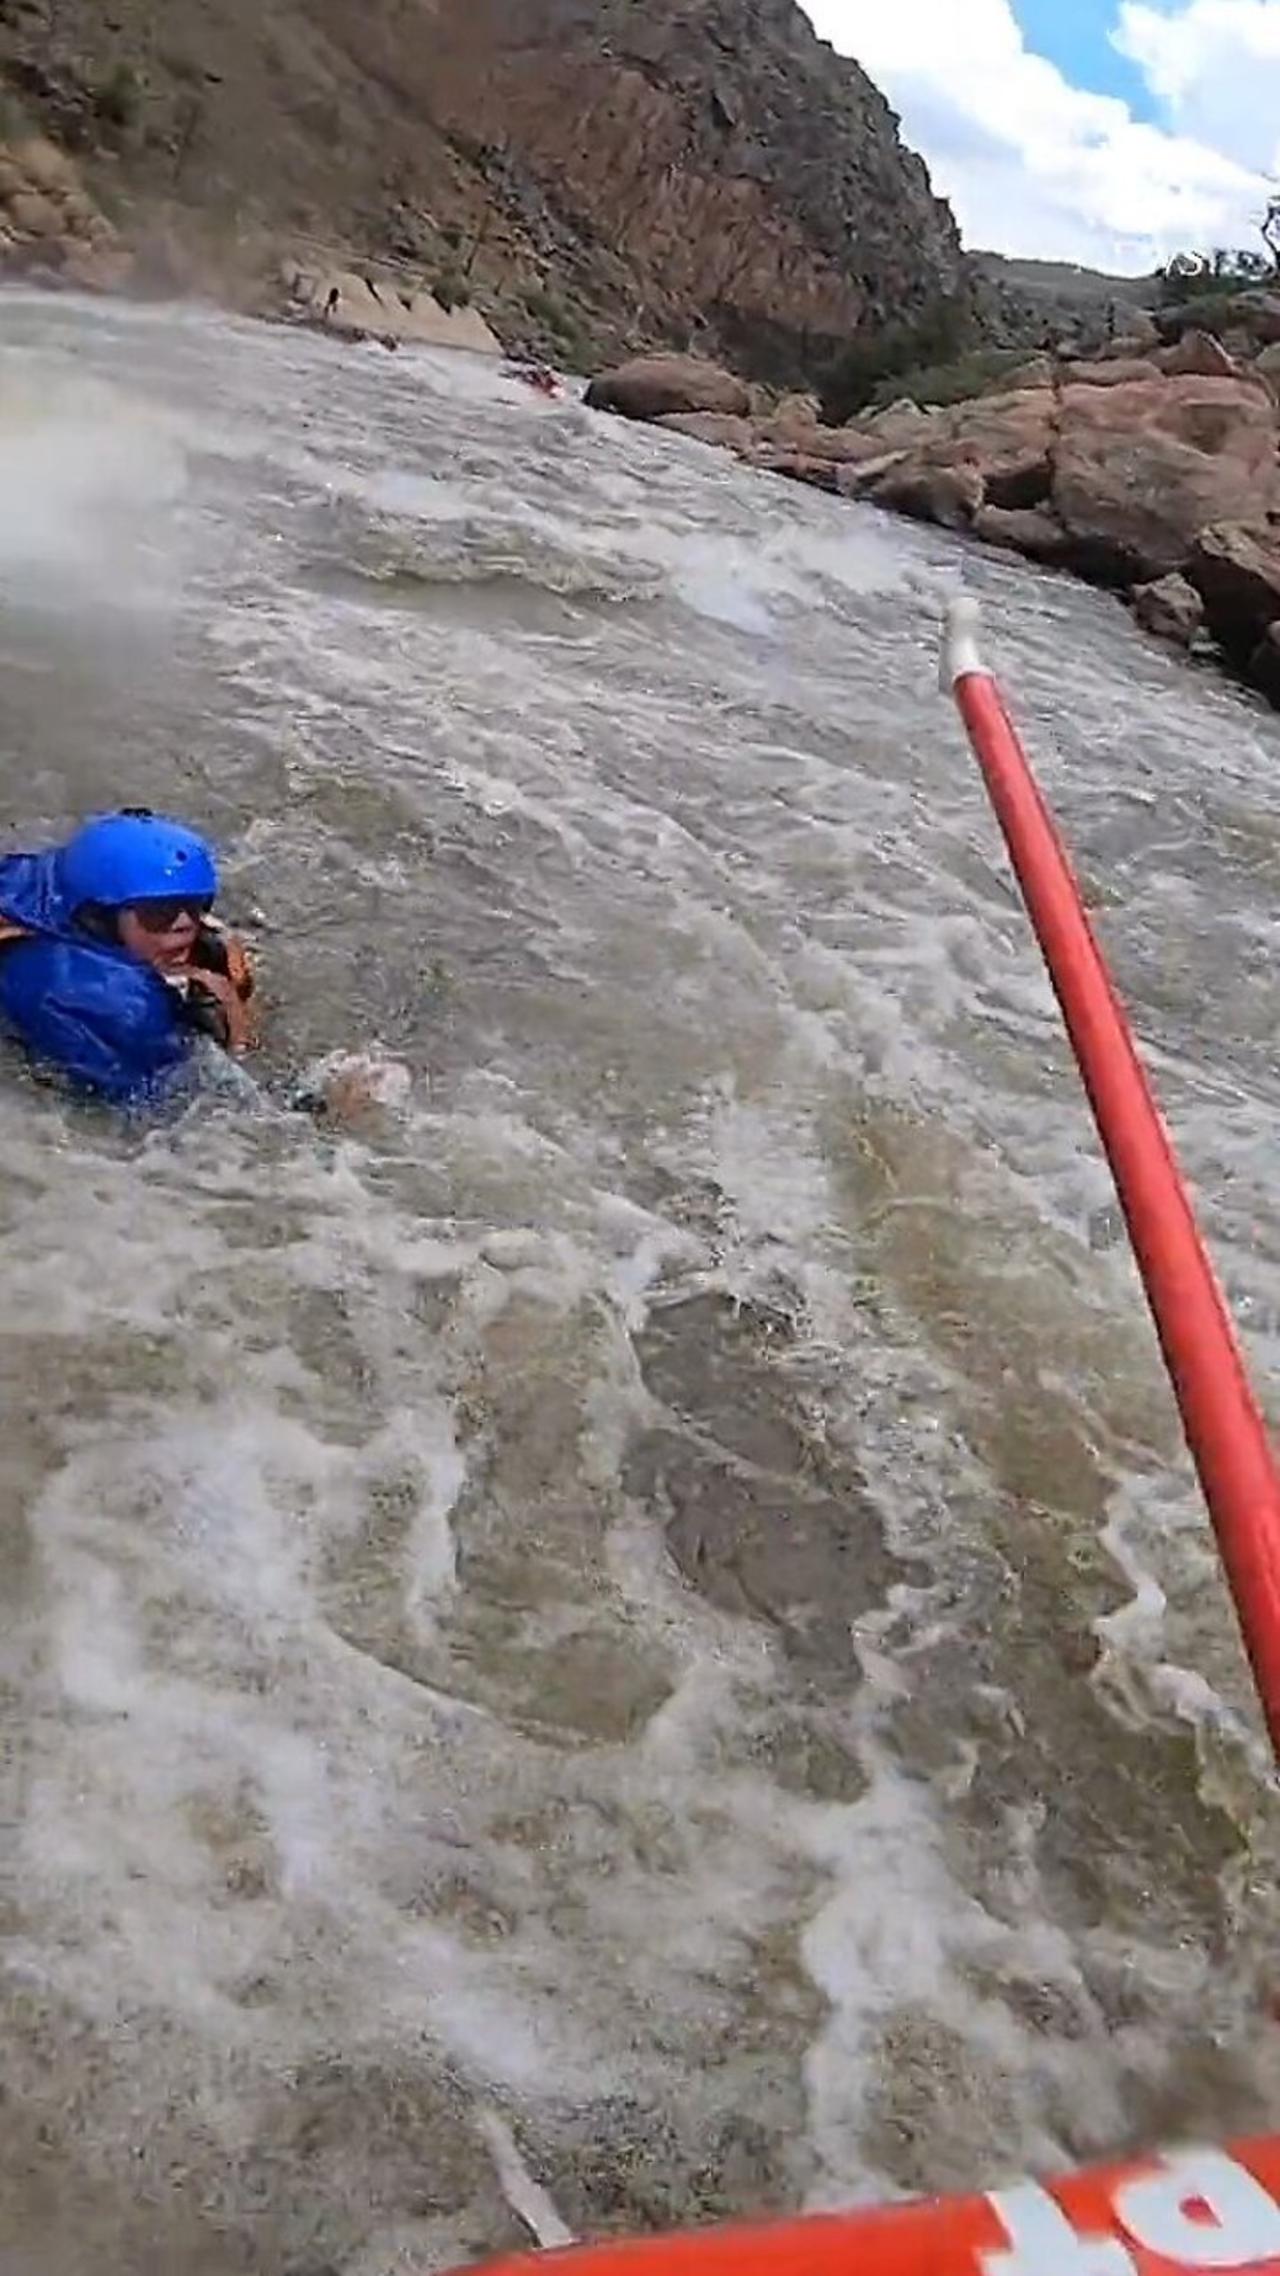 RAPIDS RESCUE: A woman was rescued after she fell into fast-moving rapids while whitewater